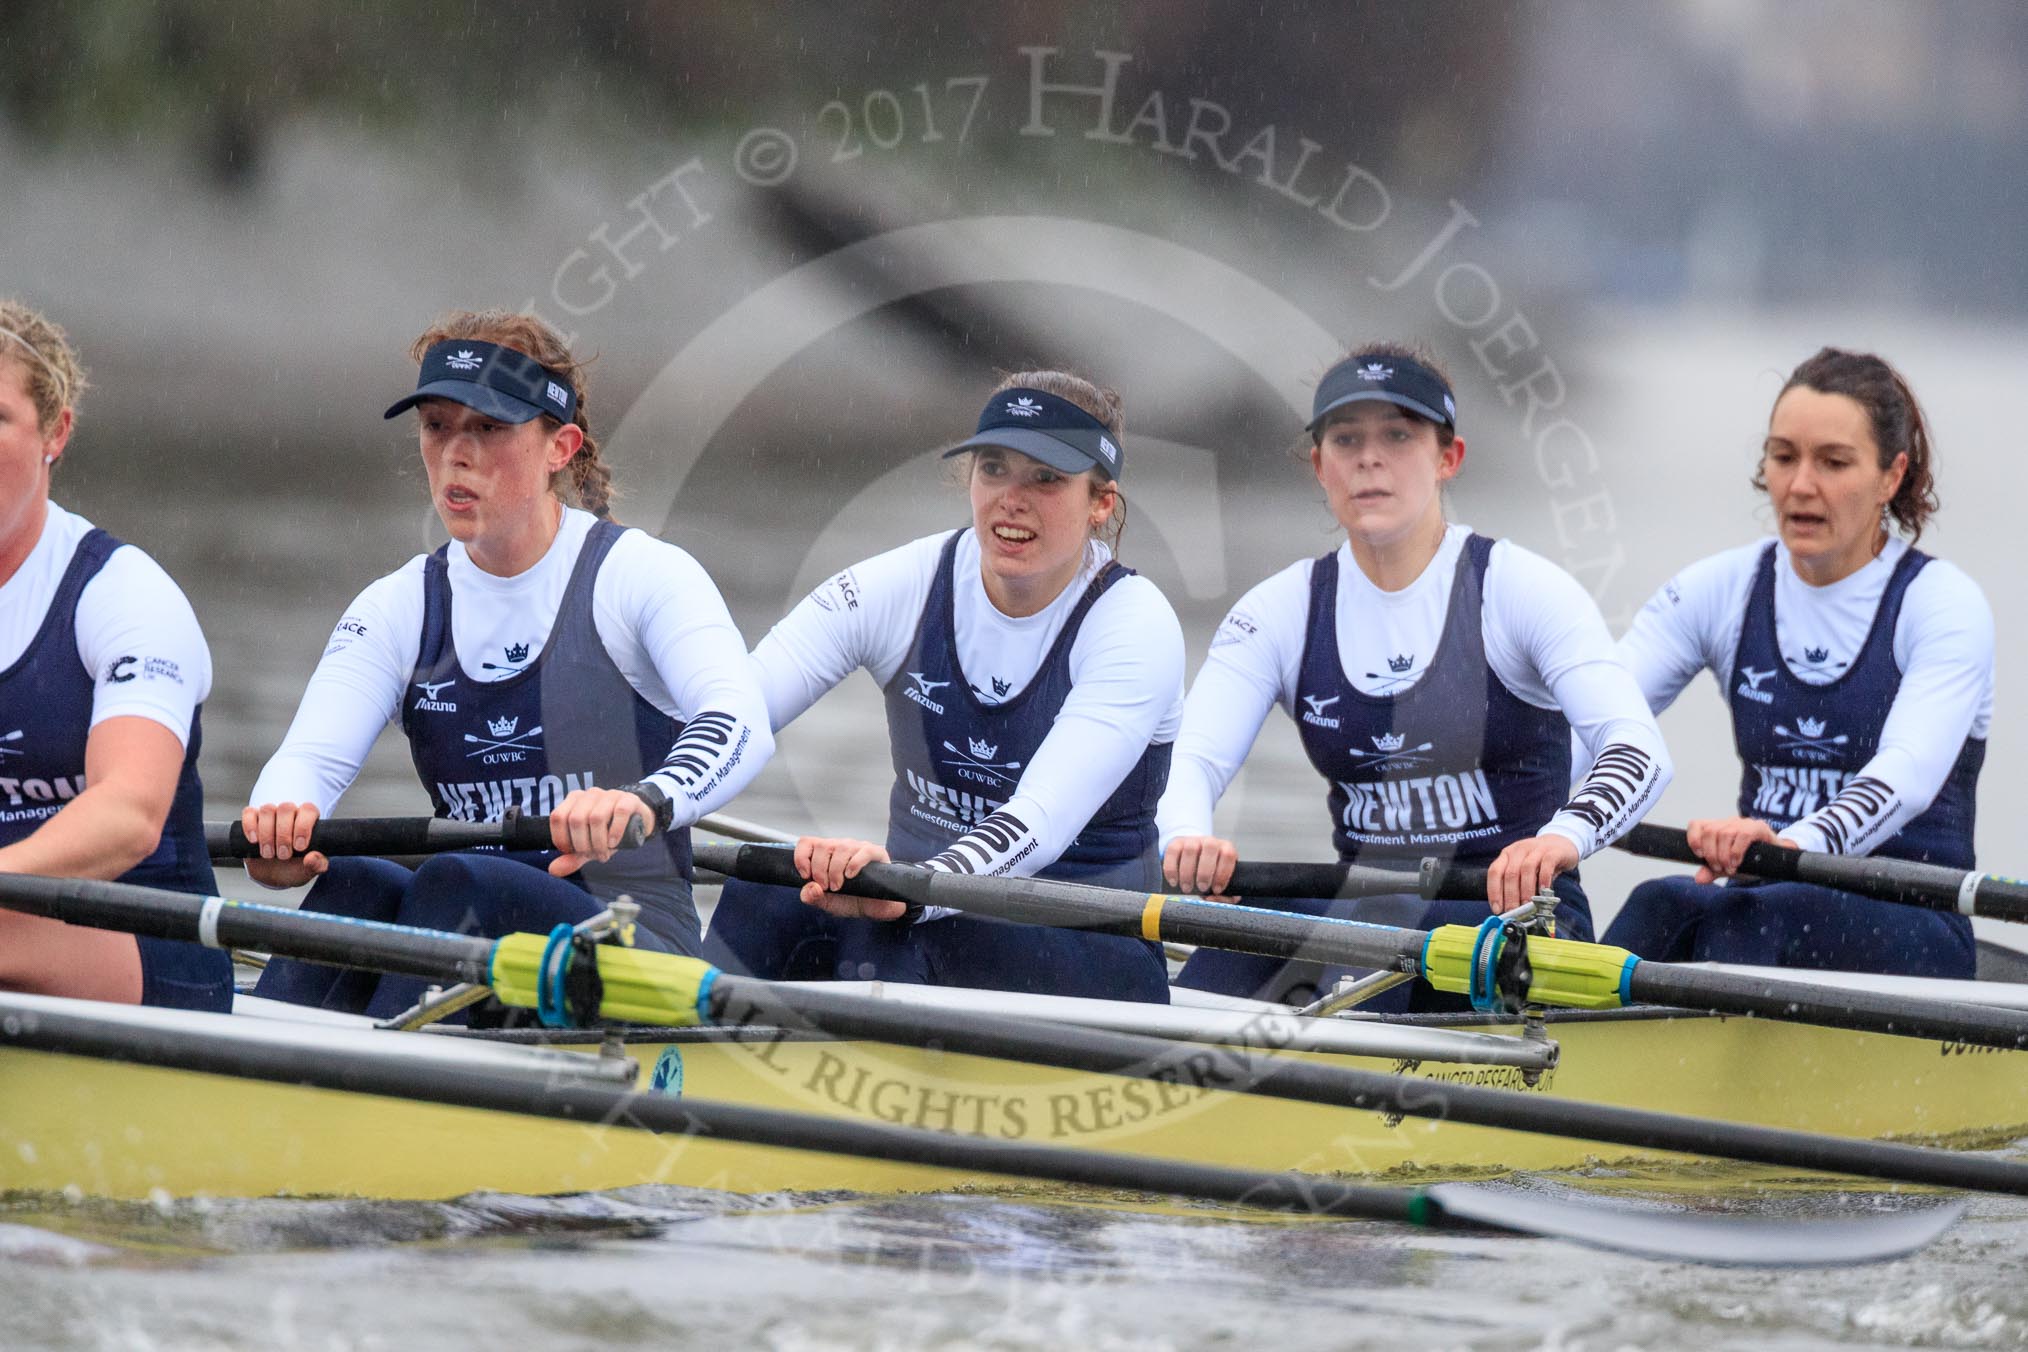 The Boat Race season 2018 - Women's Boat Race Trial Eights (OUWBC, Oxford): "Coursing River" -  5 Morgan McGovern, 4 Anna Murgatroyd, 3 Stefanie Zekoll, 2 Rachel Anderson, bow Sarah Payne-Riches.
River Thames between Putney Bridge and Mortlake,
London SW15,

United Kingdom,
on 21 January 2018 at 14:37, image #118